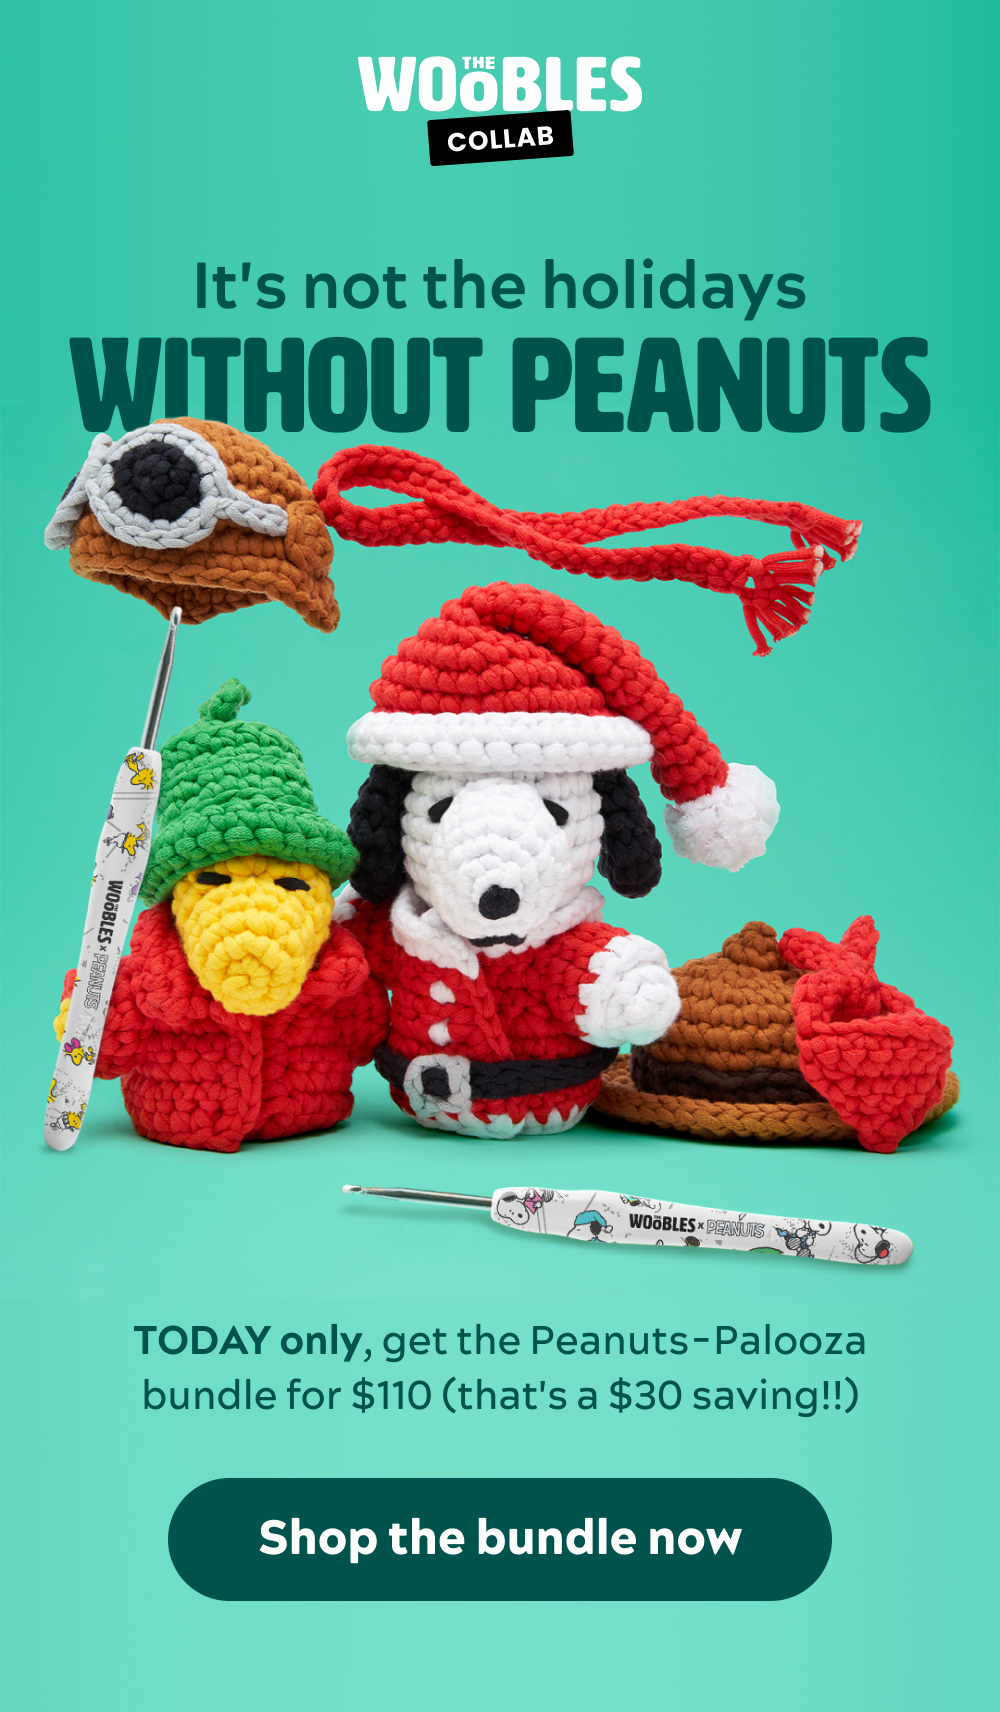 The Woobles: Wooble holiday magic with Peanuts